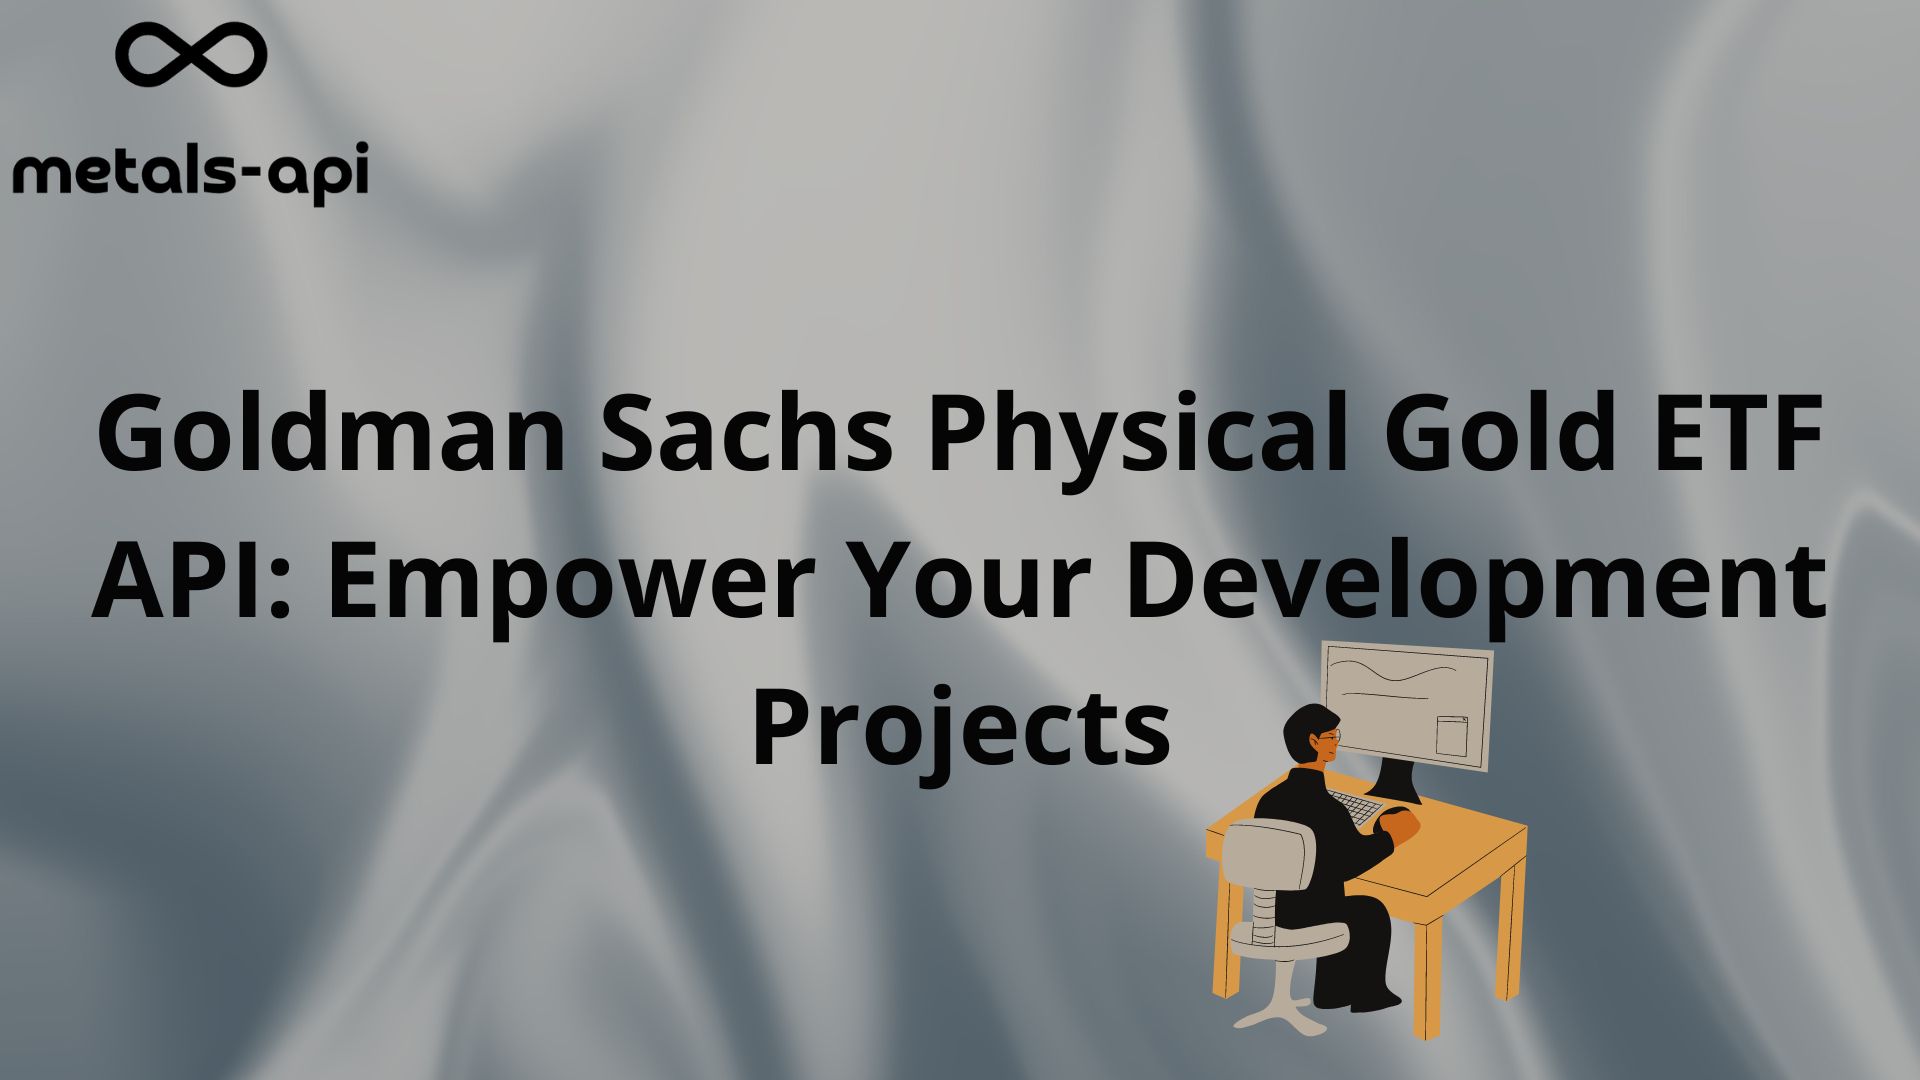 Goldman Sachs Physical Gold ETF API: Empower Your Development Projects